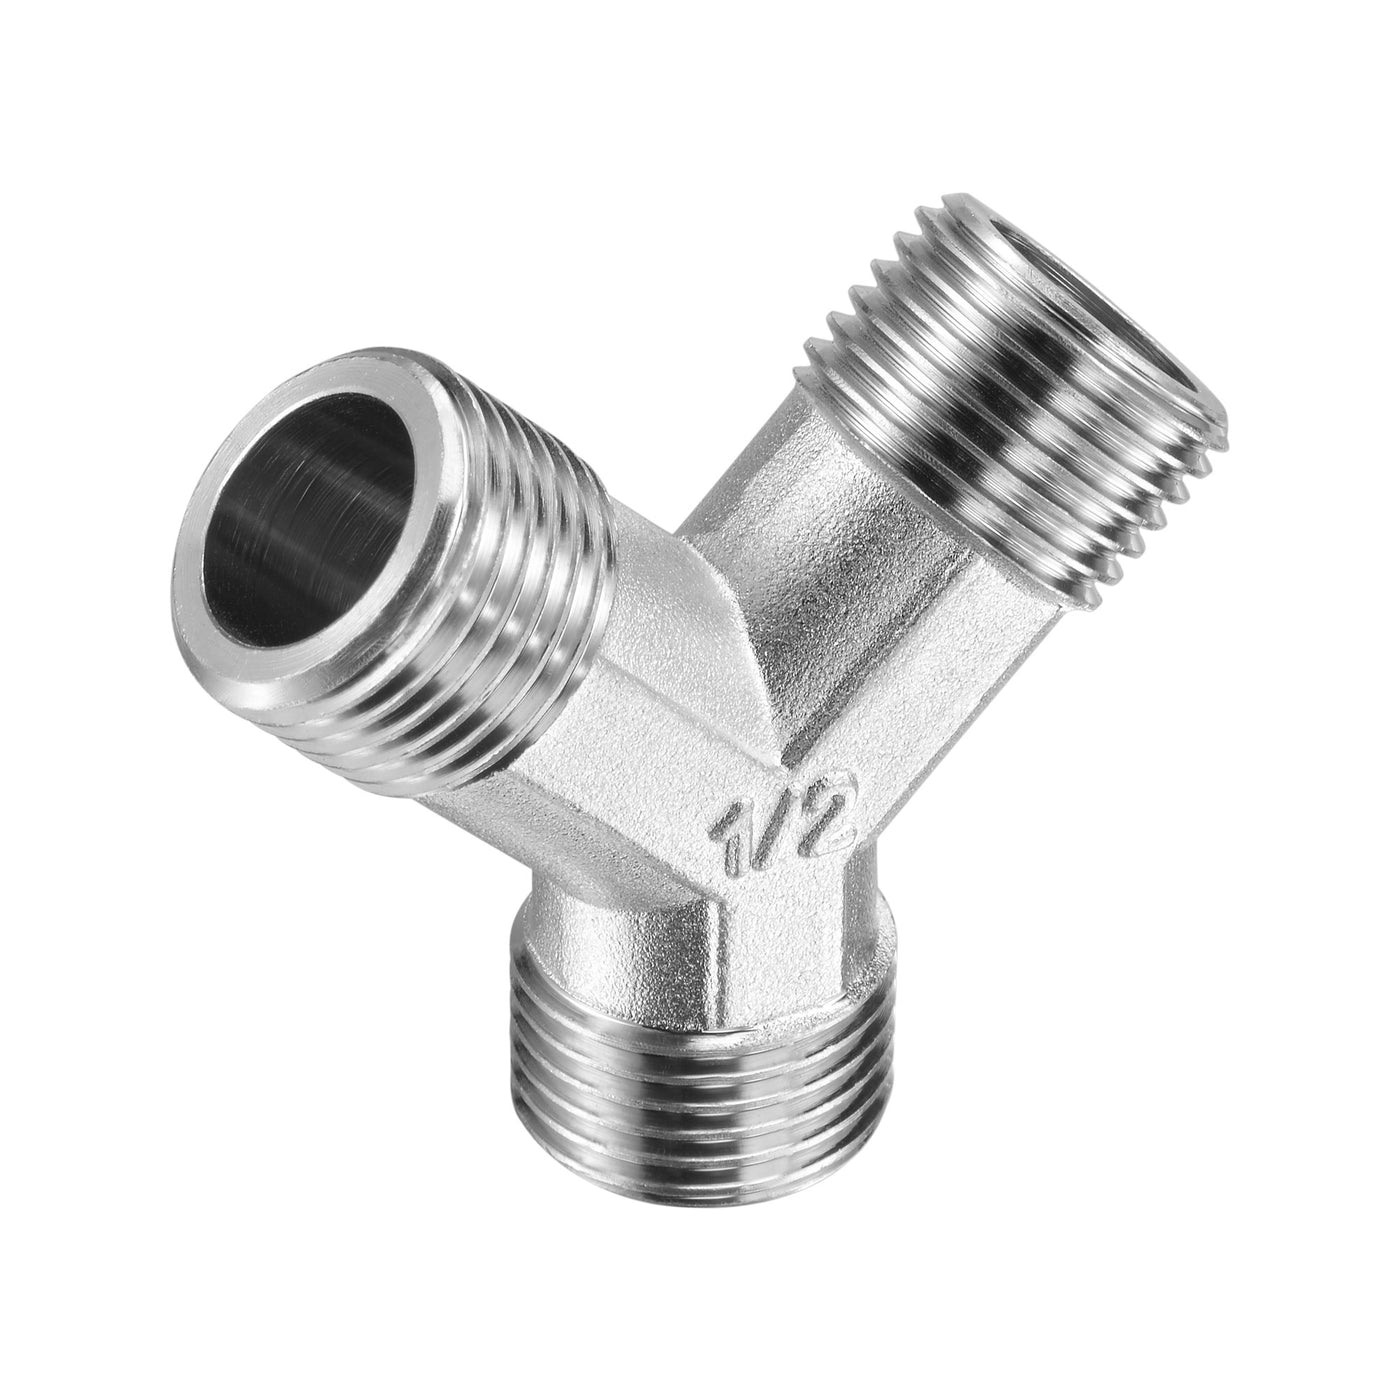 uxcell Uxcell Pipe Fitting G1/2 Male Thread Y Shape 3 Way Wye Hose Connector Adapter, Nickel-Plated Copper